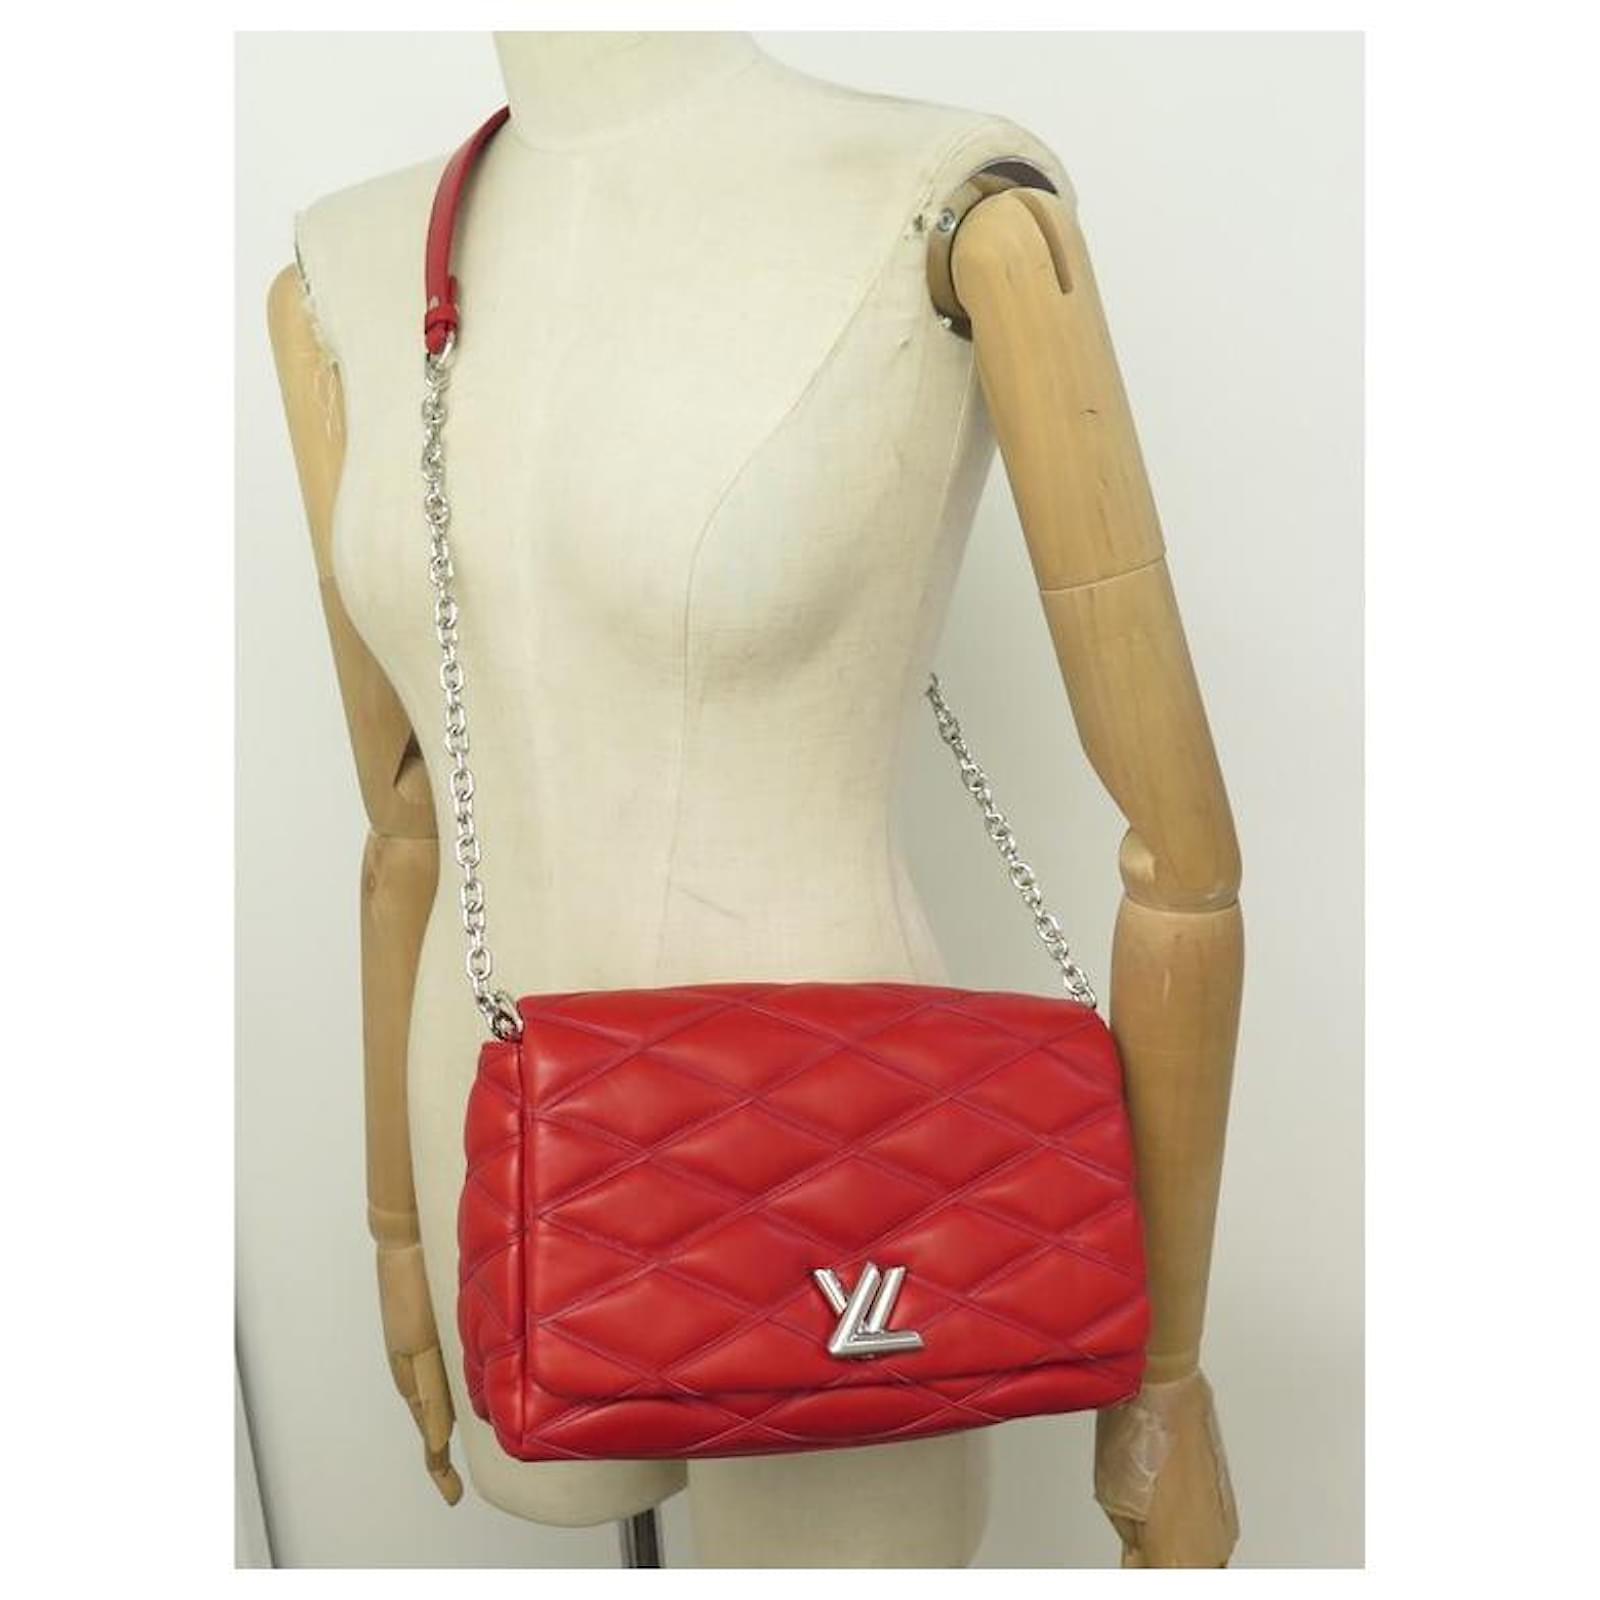 Go 14 leather handbag Louis Vuitton Red in Leather - 30353445